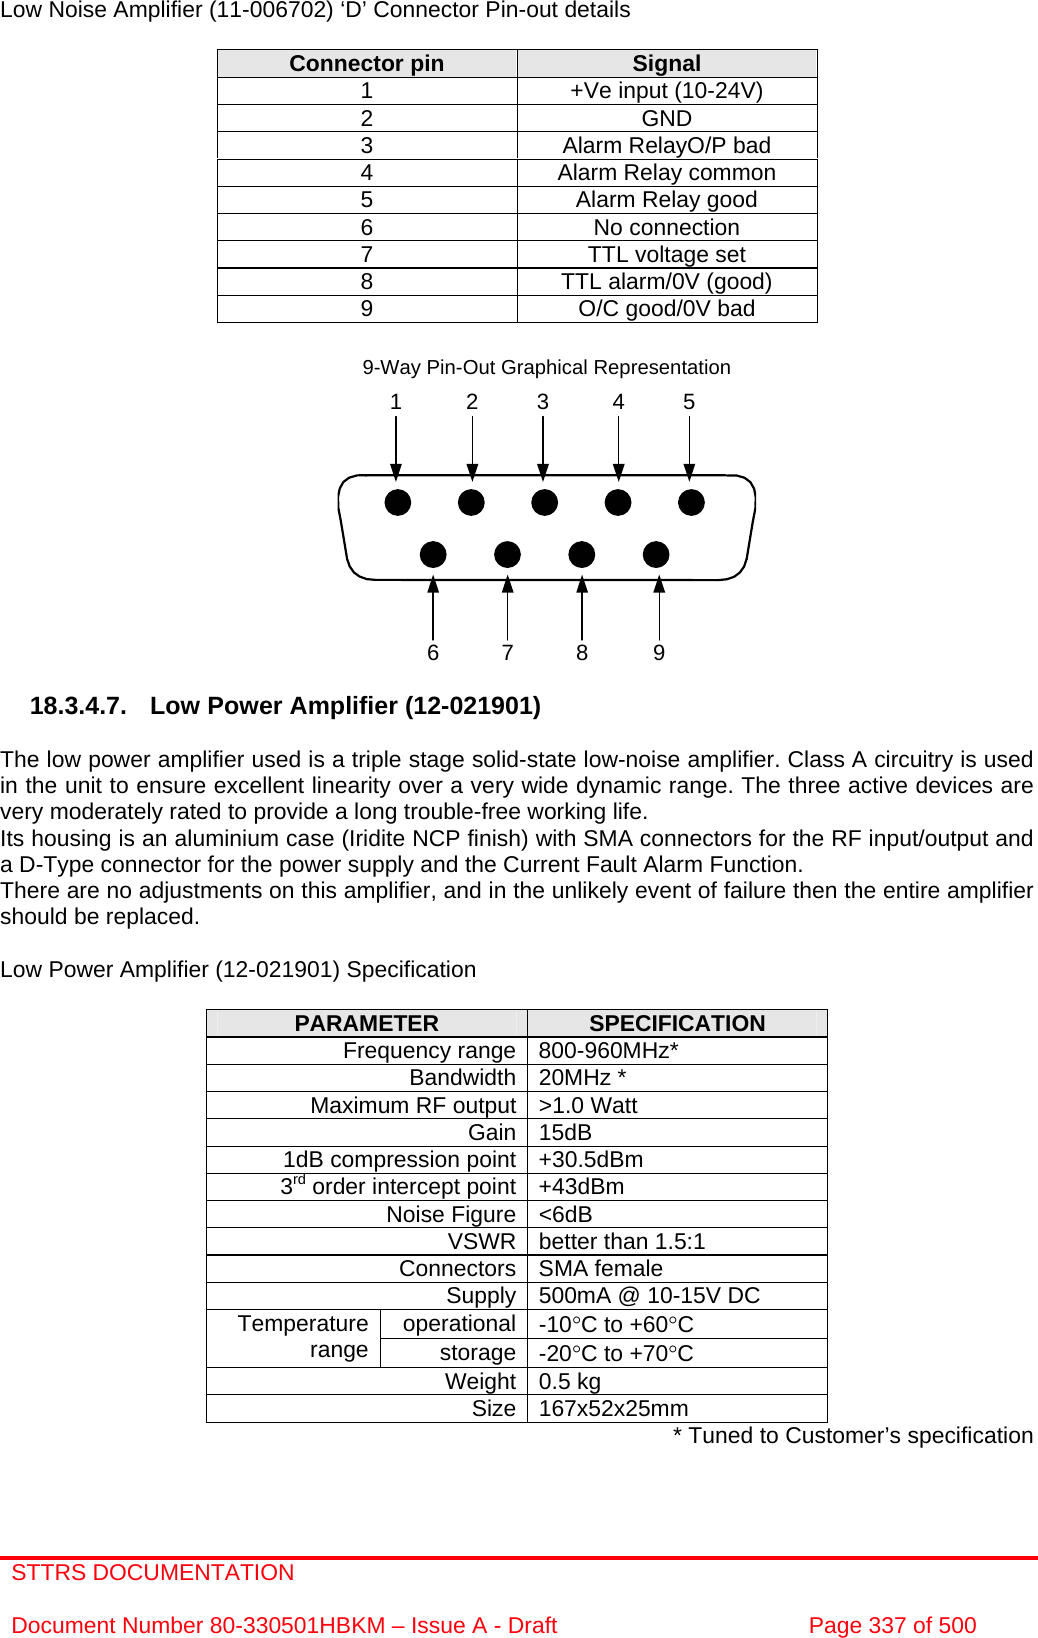 STTRS DOCUMENTATION  Document Number 80-330501HBKM – Issue A - Draft  Page 337 of 500  7 8 961 2 3 4 59-Way Pin-Out Graphical Representation Low Noise Amplifier (11-006702) ‘D’ Connector Pin-out details  Connector pin  Signal 1  +Ve input (10-24V) 2 GND 3  Alarm RelayO/P bad 4  Alarm Relay common 5  Alarm Relay good 6 No connection 7  TTL voltage set 8  TTL alarm/0V (good) 9  O/C good/0V bad               18.3.4.7.  Low Power Amplifier (12-021901)  The low power amplifier used is a triple stage solid-state low-noise amplifier. Class A circuitry is used in the unit to ensure excellent linearity over a very wide dynamic range. The three active devices are very moderately rated to provide a long trouble-free working life.  Its housing is an aluminium case (Iridite NCP finish) with SMA connectors for the RF input/output and a D-Type connector for the power supply and the Current Fault Alarm Function. There are no adjustments on this amplifier, and in the unlikely event of failure then the entire amplifier should be replaced.  Low Power Amplifier (12-021901) Specification  PARAMETER  SPECIFICATION Frequency range 800-960MHz* Bandwidth 20MHz * Maximum RF output &gt;1.0 Watt Gain 15dB 1dB compression point +30.5dBm 3rd order intercept point +43dBm Noise Figure &lt;6dB VSWR better than 1.5:1 Connectors SMA female Supply 500mA @ 10-15V DC operational -10°C to +60°C Temperature range  storage -20°C to +70°C Weight 0.5 kg Size 167x52x25mm * Tuned to Customer’s specification 